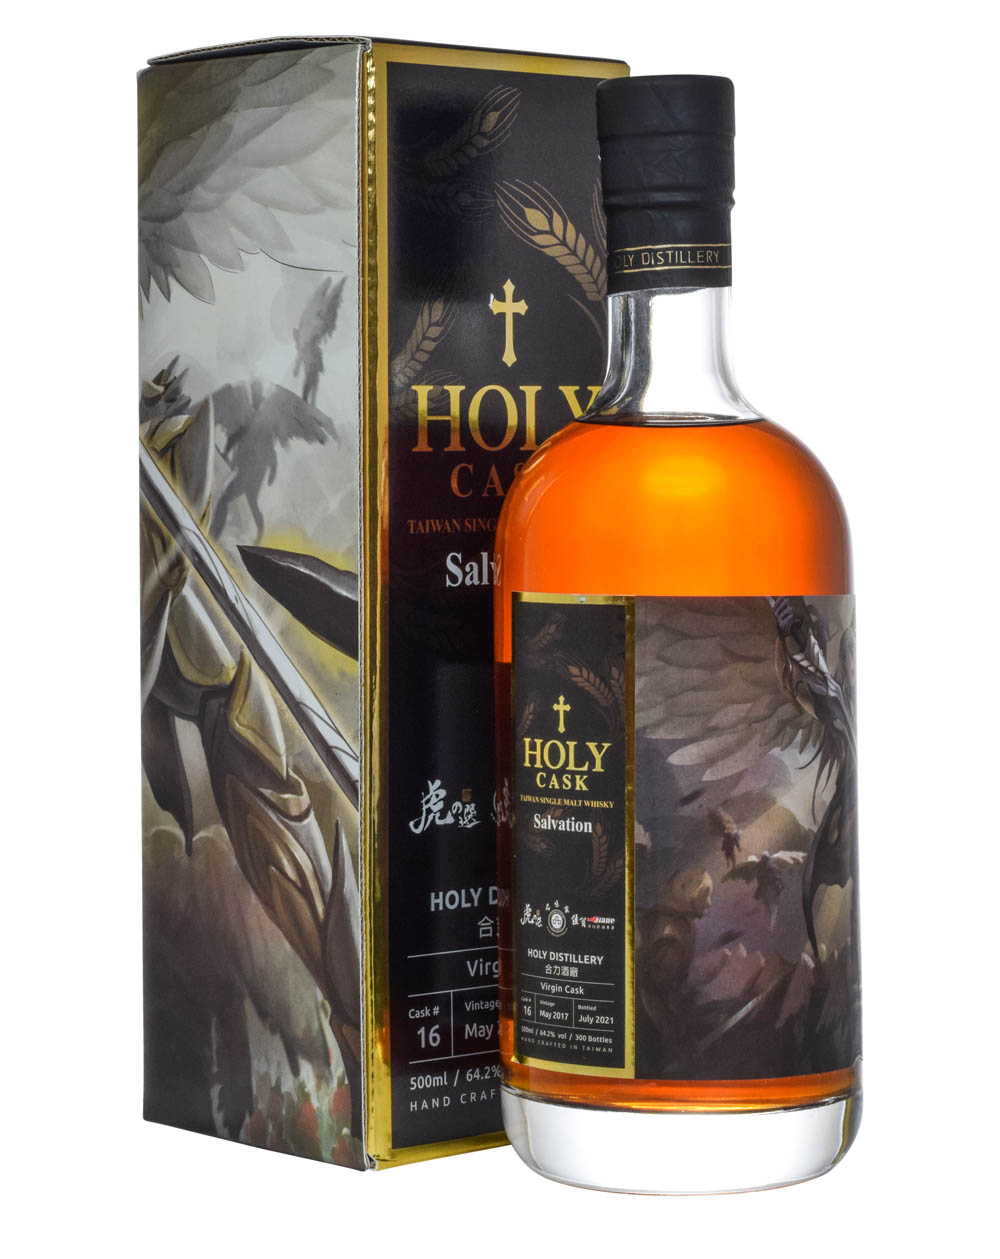 Holy Cask Salvation 4 Years Old Cask 16 Box Must Have Malts MHM